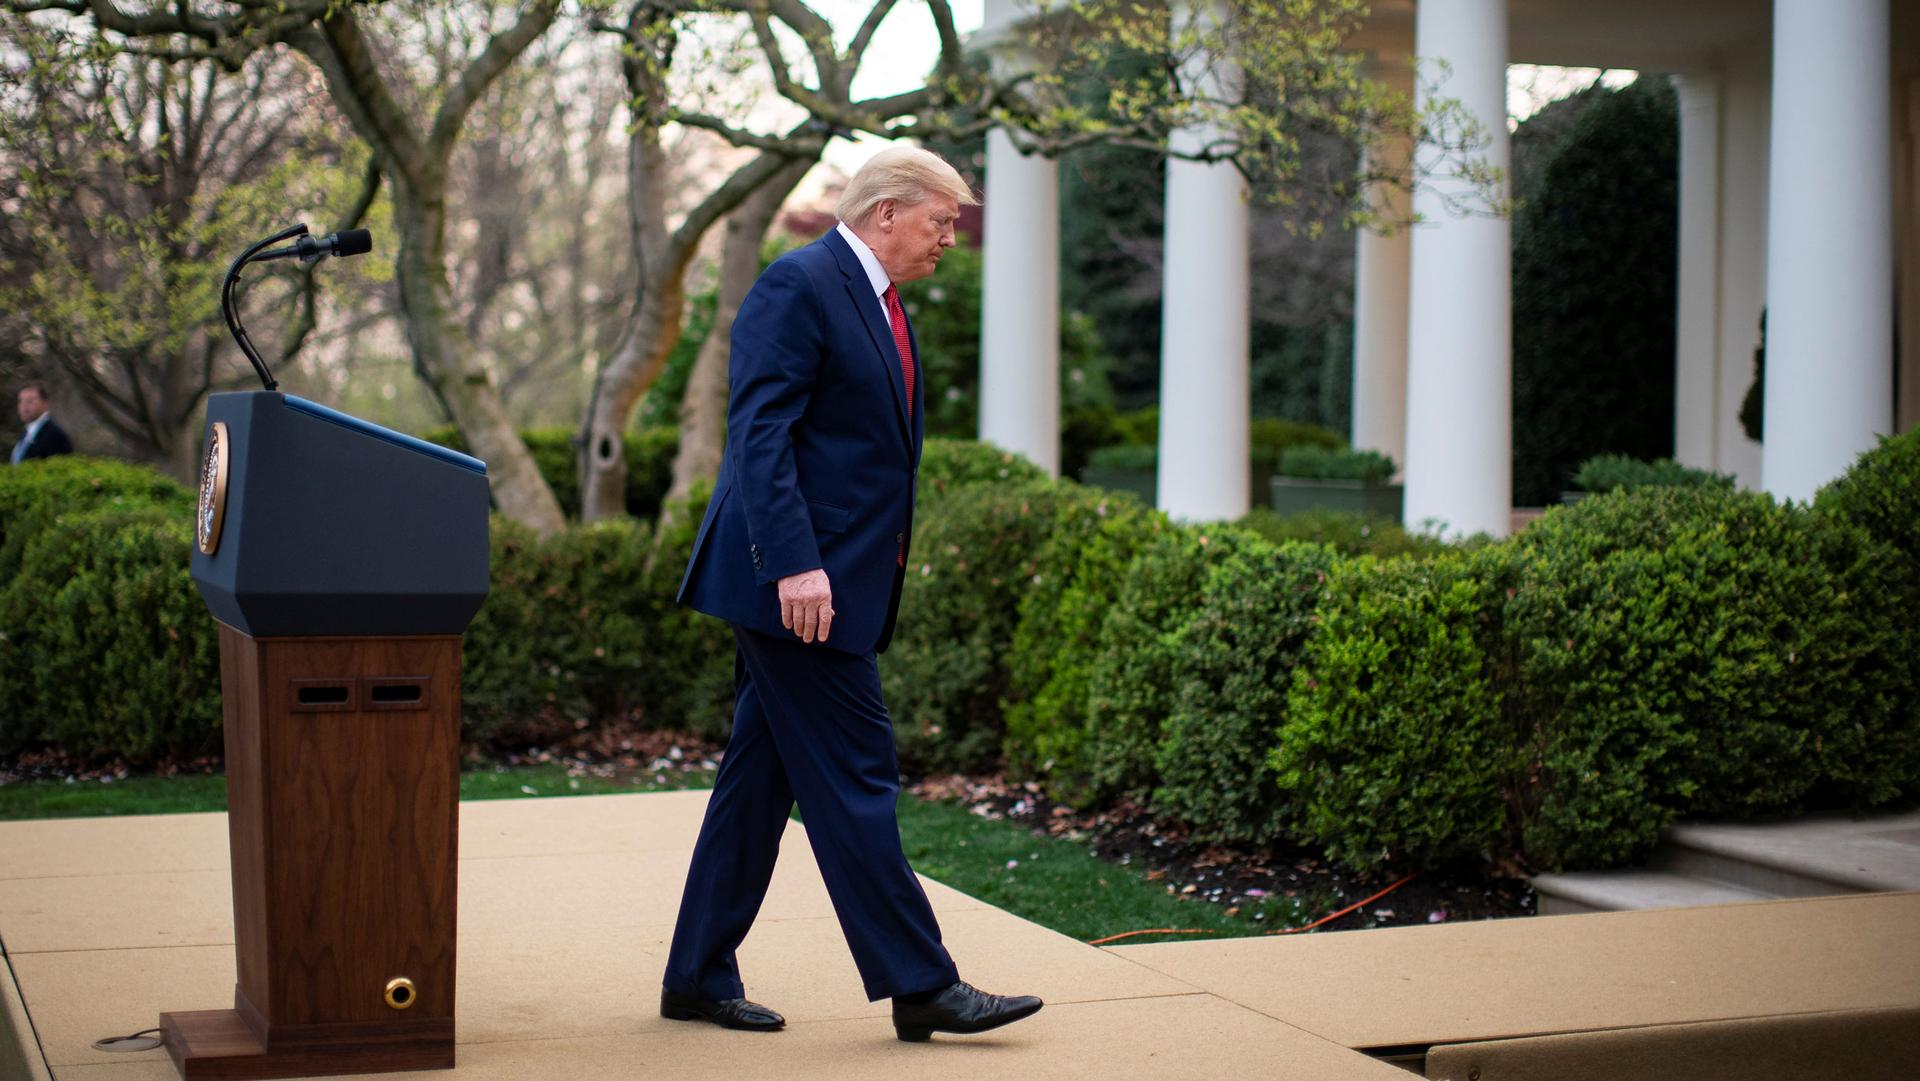 US President Donald Trump is shown wearing a blue suit and walking away from a wooden podium at the White House.